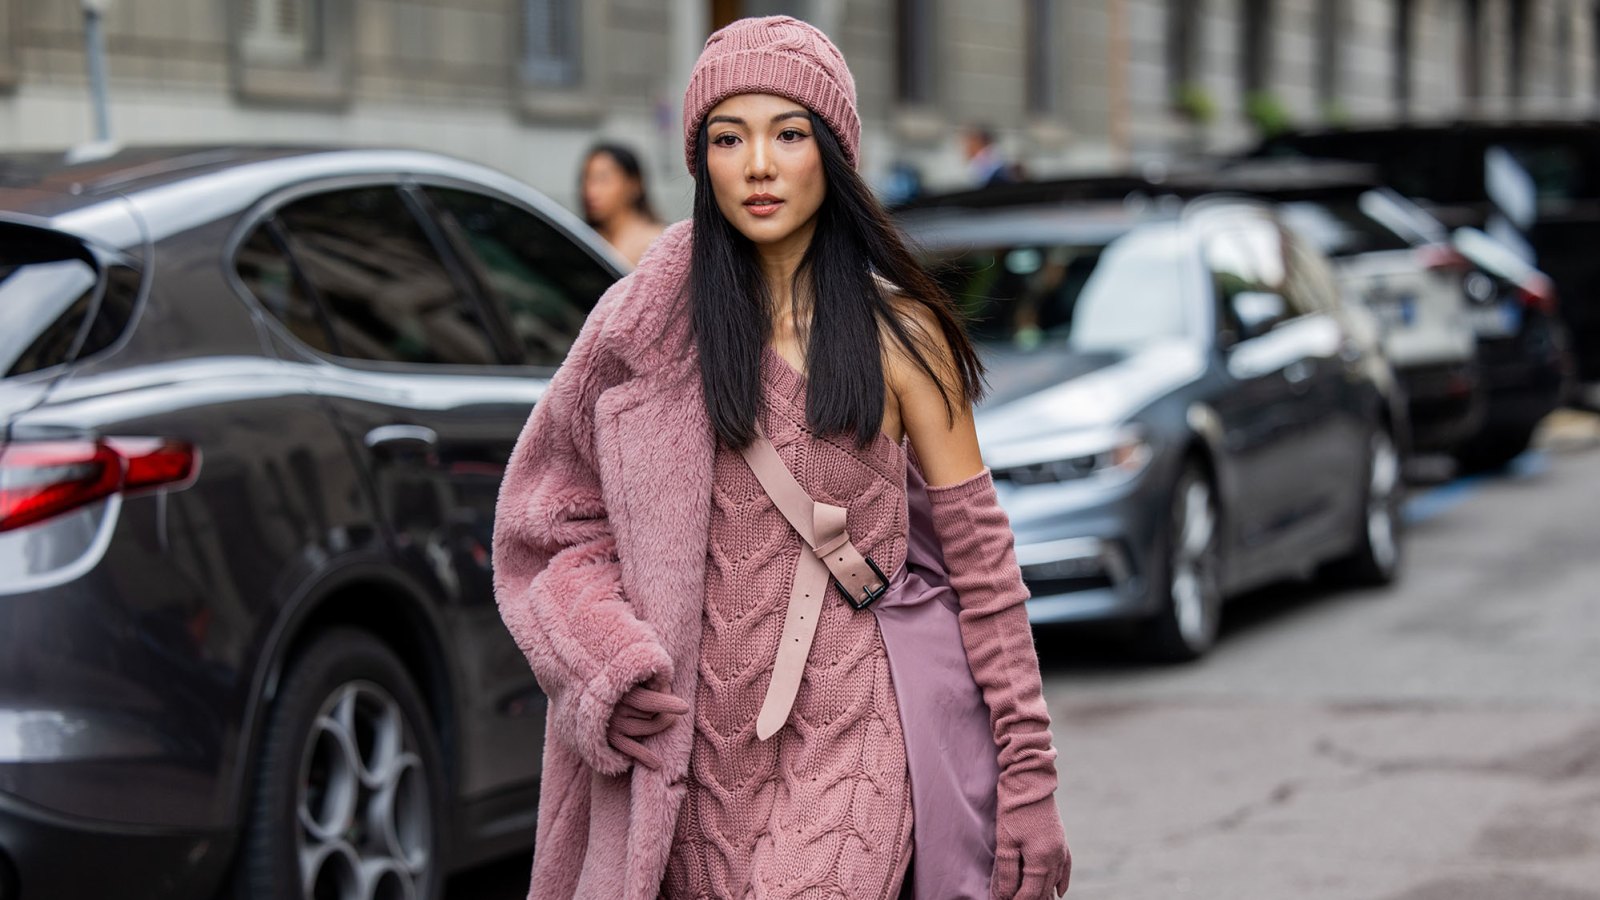 7 Fabulous Street Style Trends We've Seen All Over Milan This Week